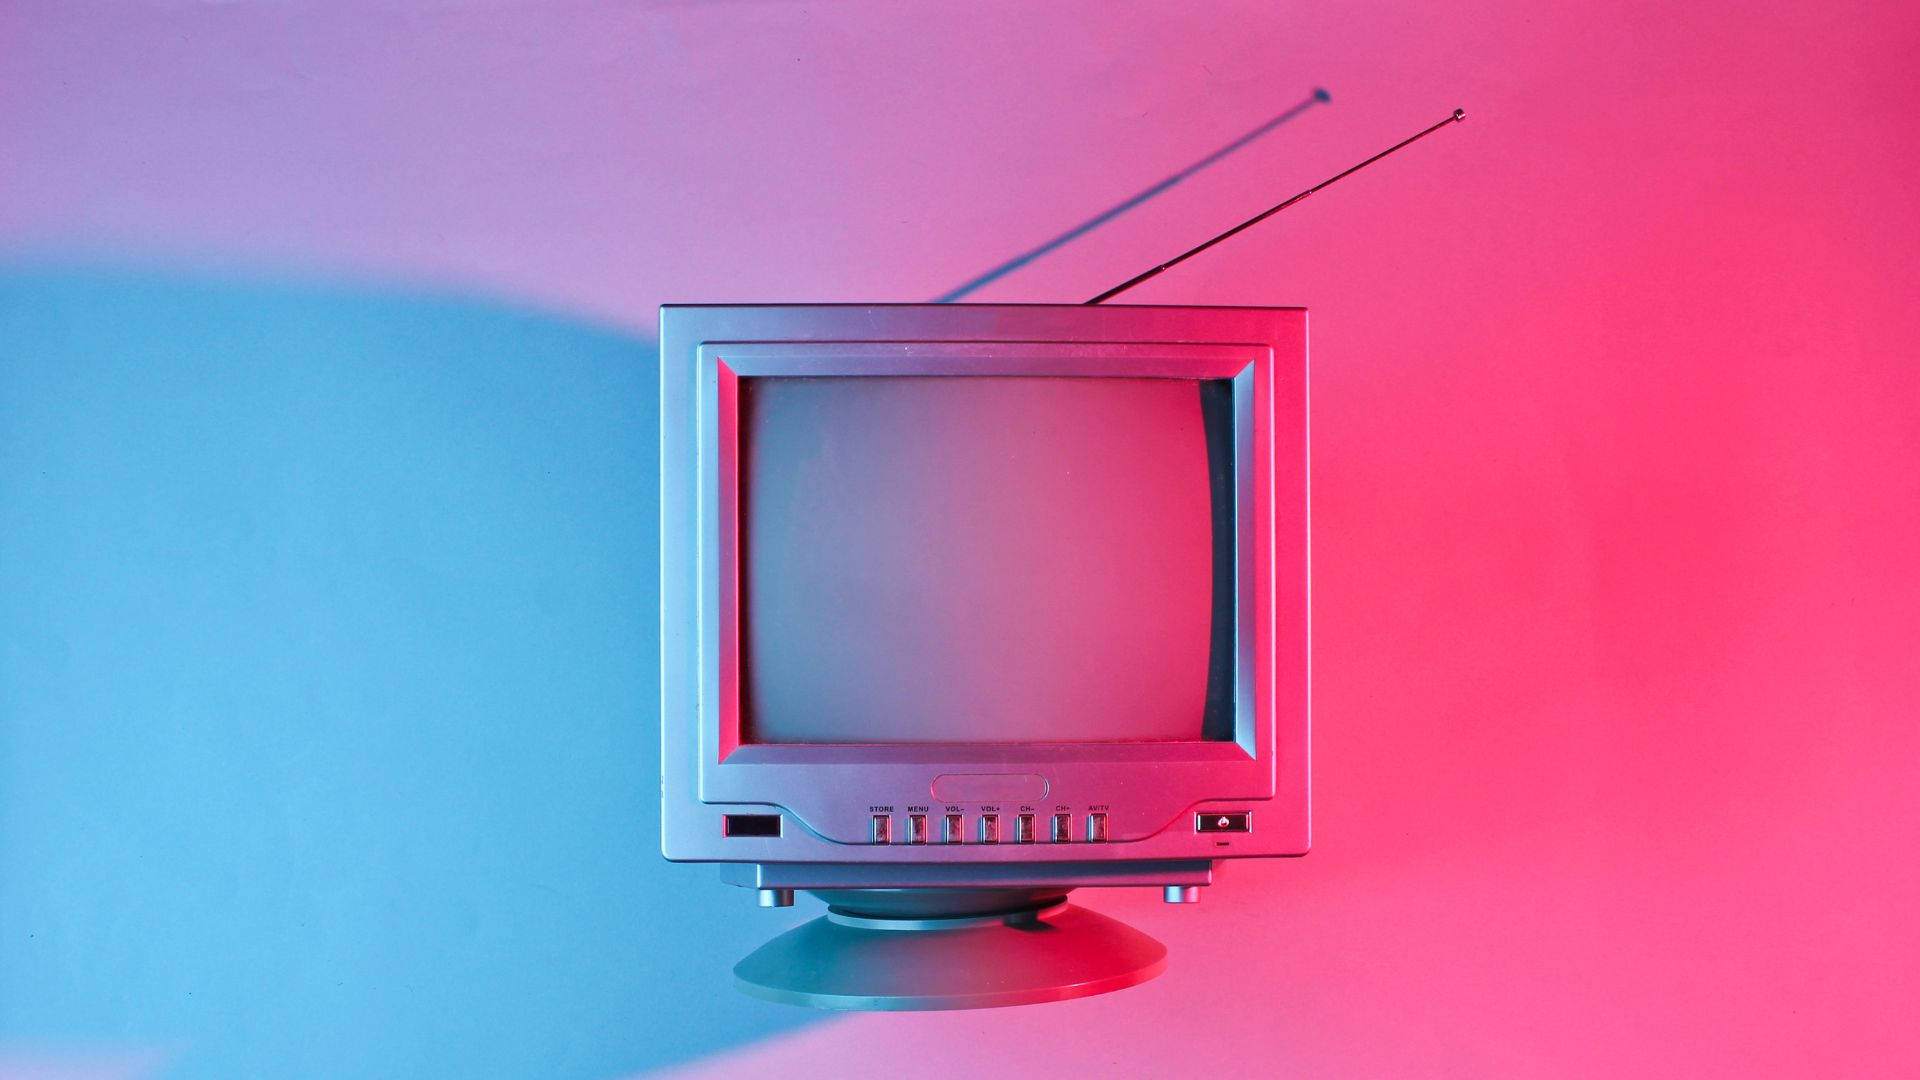 27 Television Pictures  Download Free Images on Unsplash